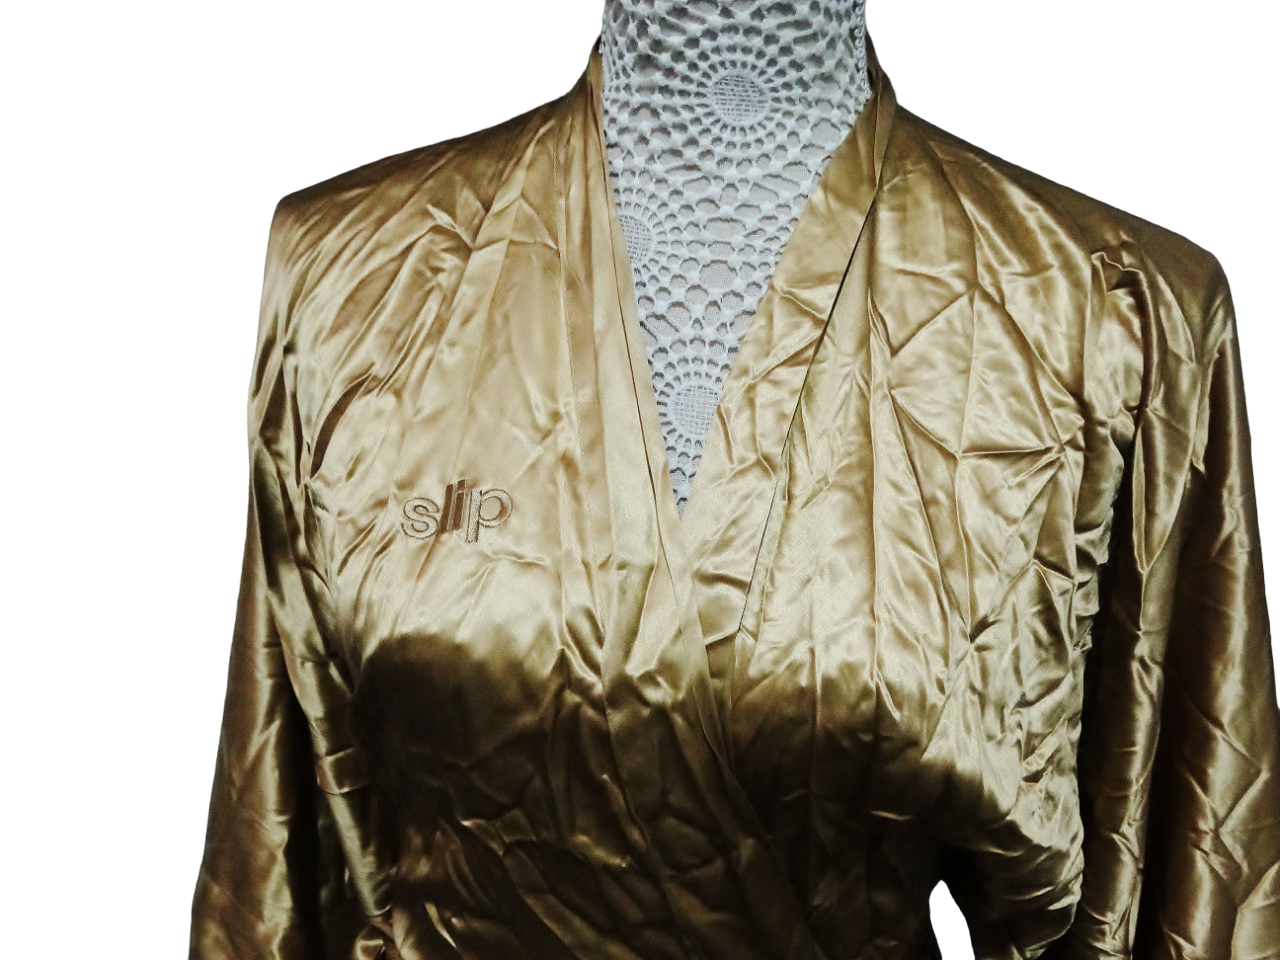 A ladies silk dressing gown - bronze colour, full length, together with a chocolate brown half - Image 5 of 6